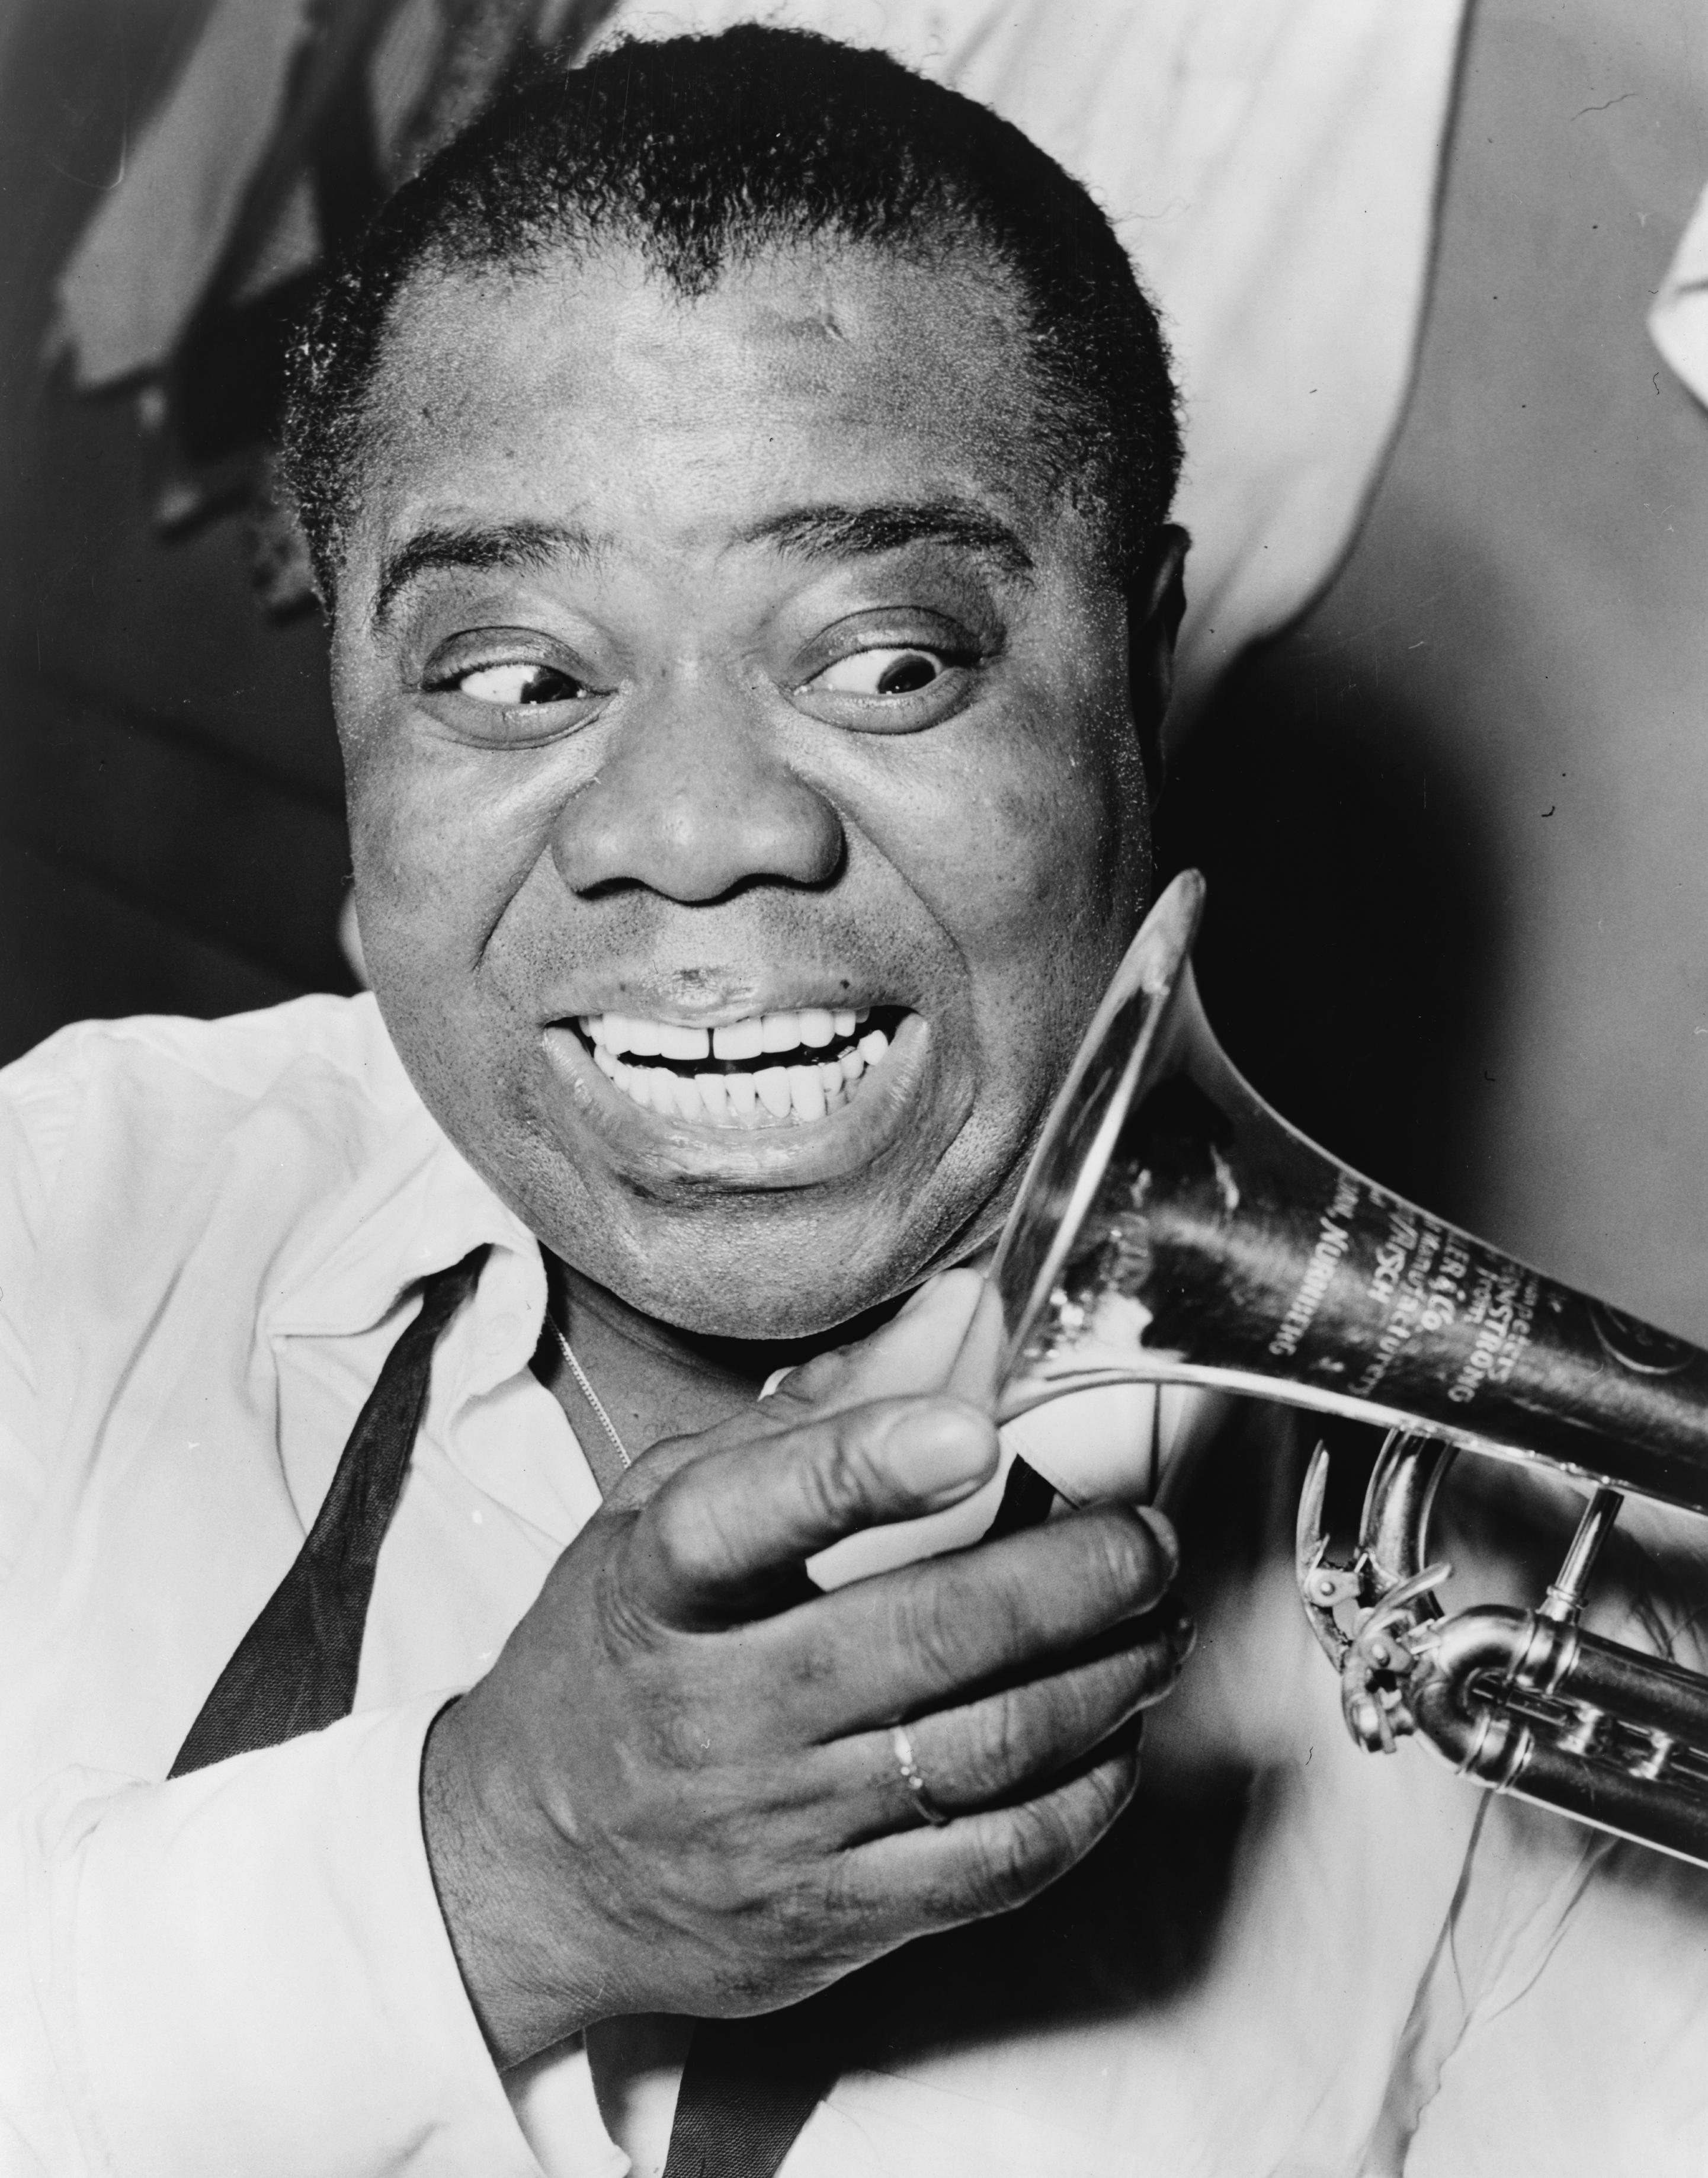 The Most Unusual Artifact At The Louis Armstrong Museum in 2023